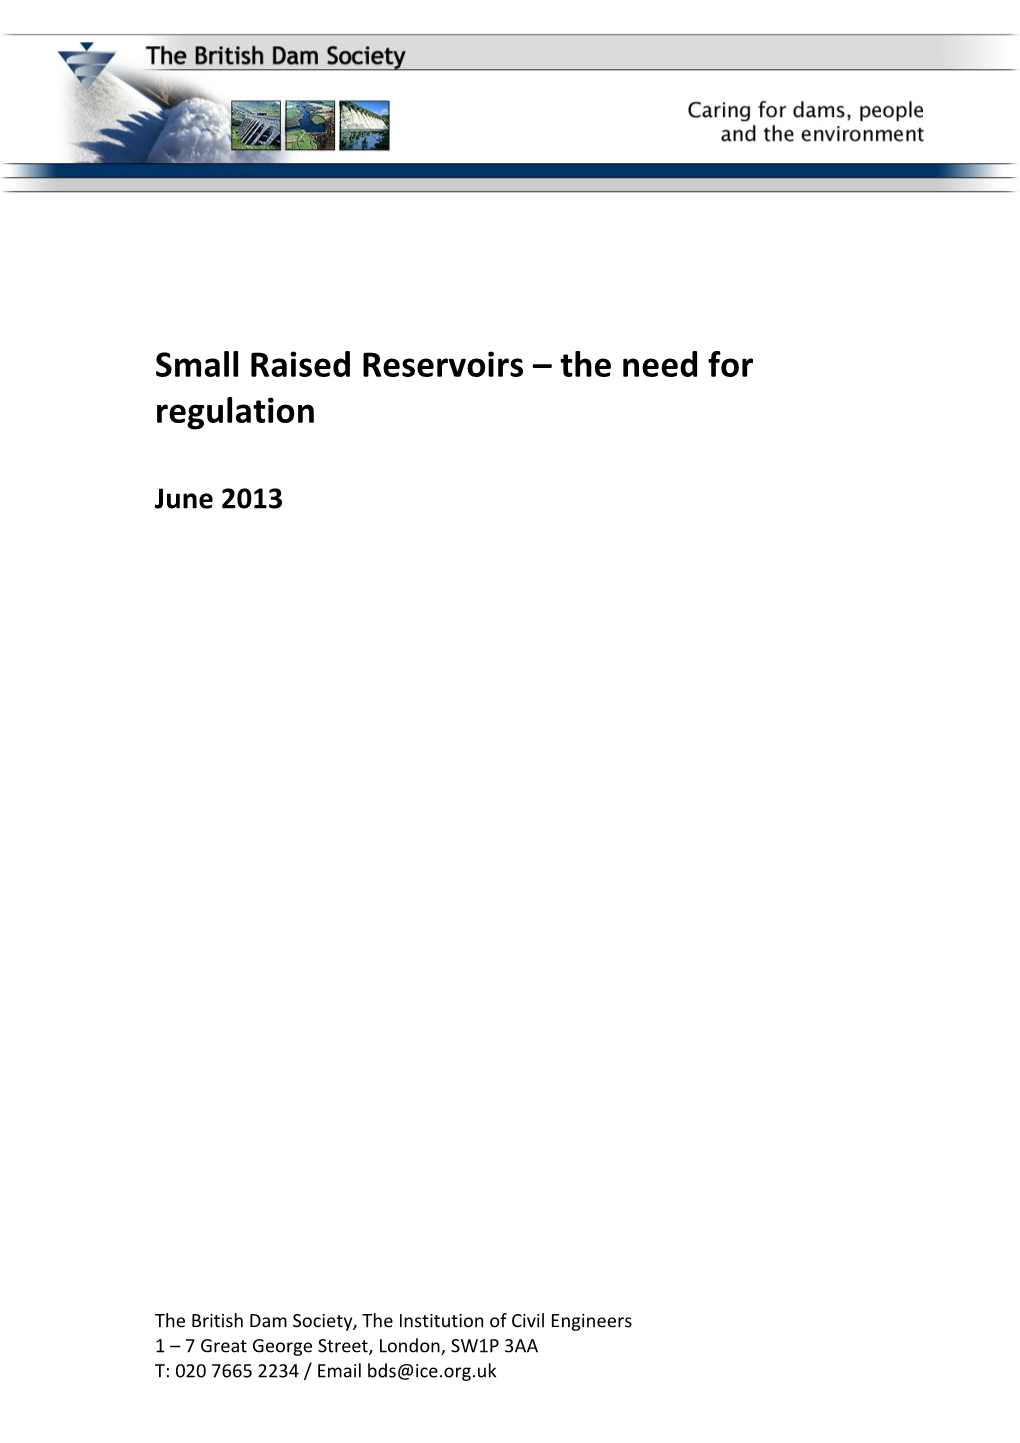 Small Raised Reservoirs the Need for Regulation June 2013.Doc